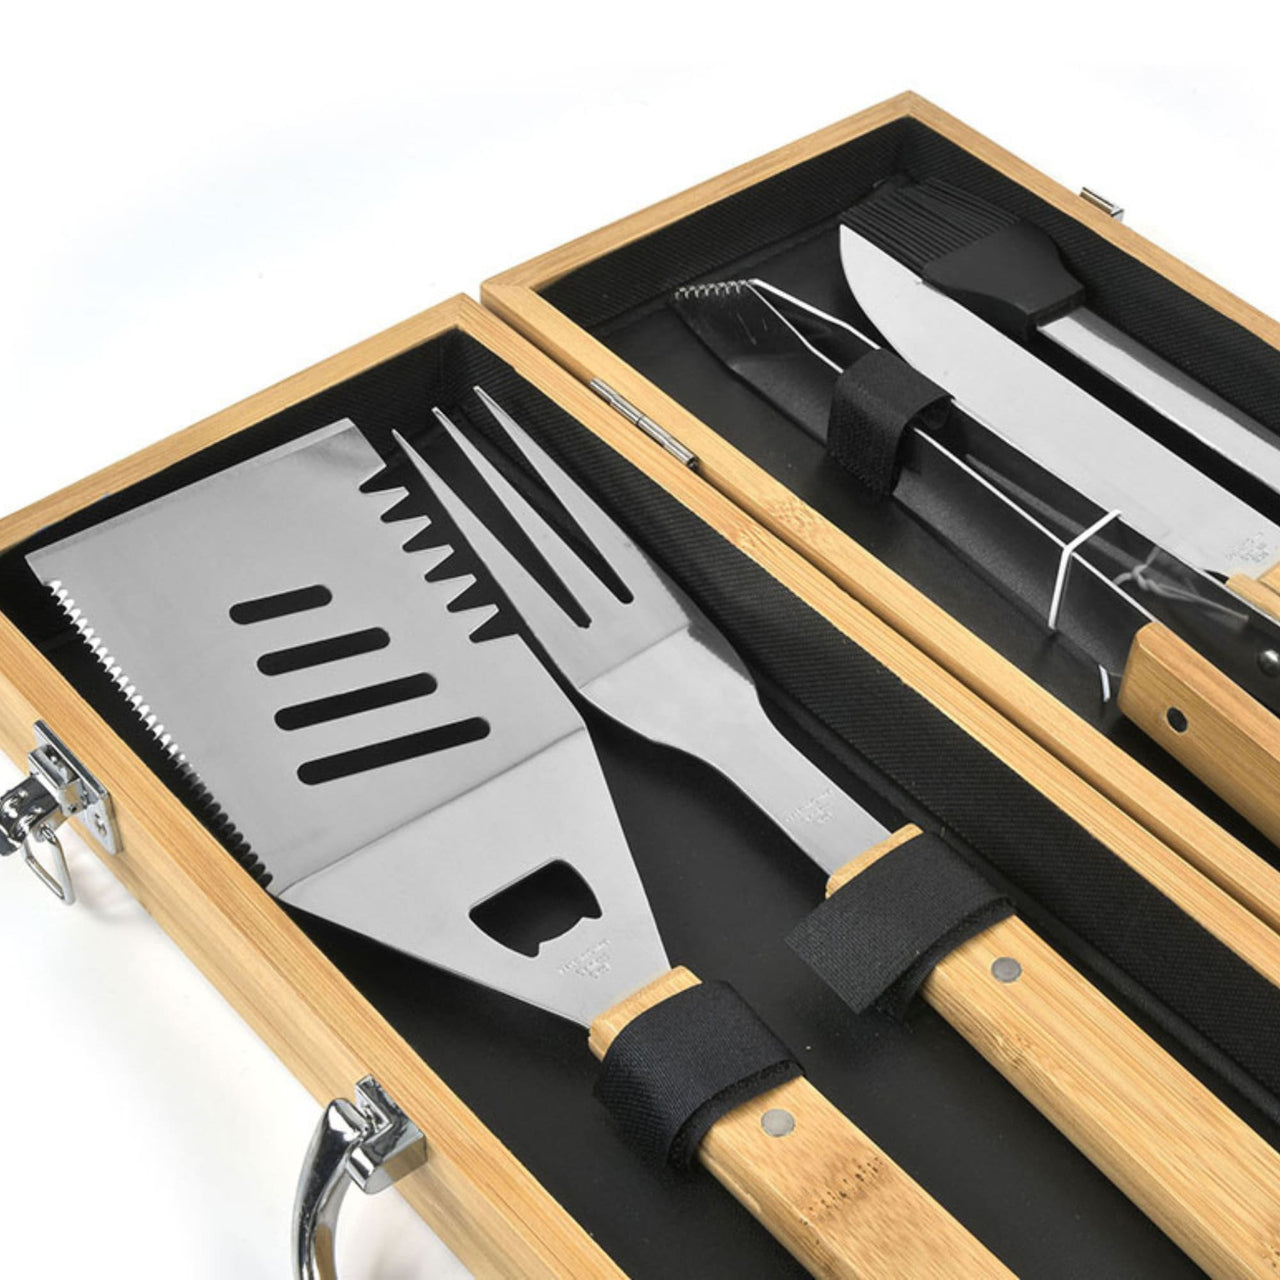 Personalized BBQ Set, Personalized BBQ tool set, Unique BBQ Grill Set,  Grill Master Engraved Barbecue Set, personalized grill set